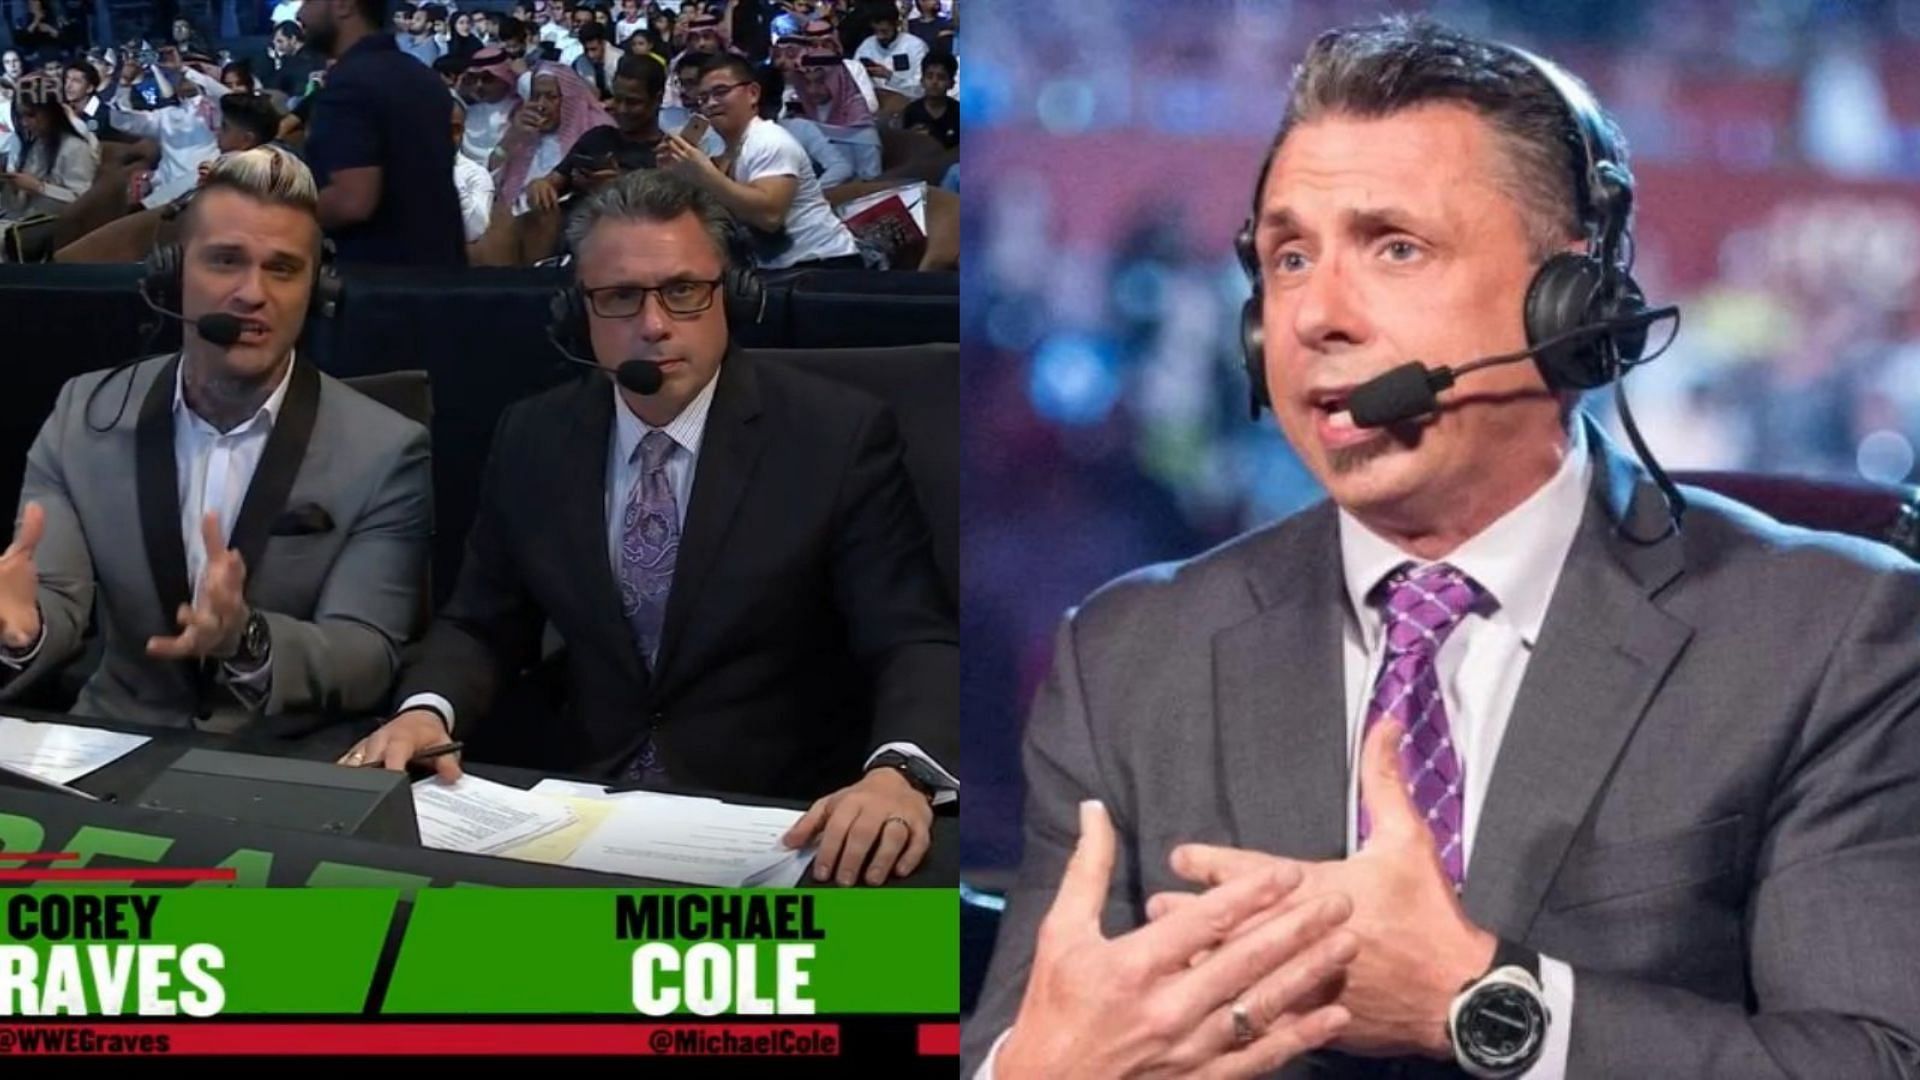 Michael Cole namedropped a top AEW star at Survivor Series WarGames